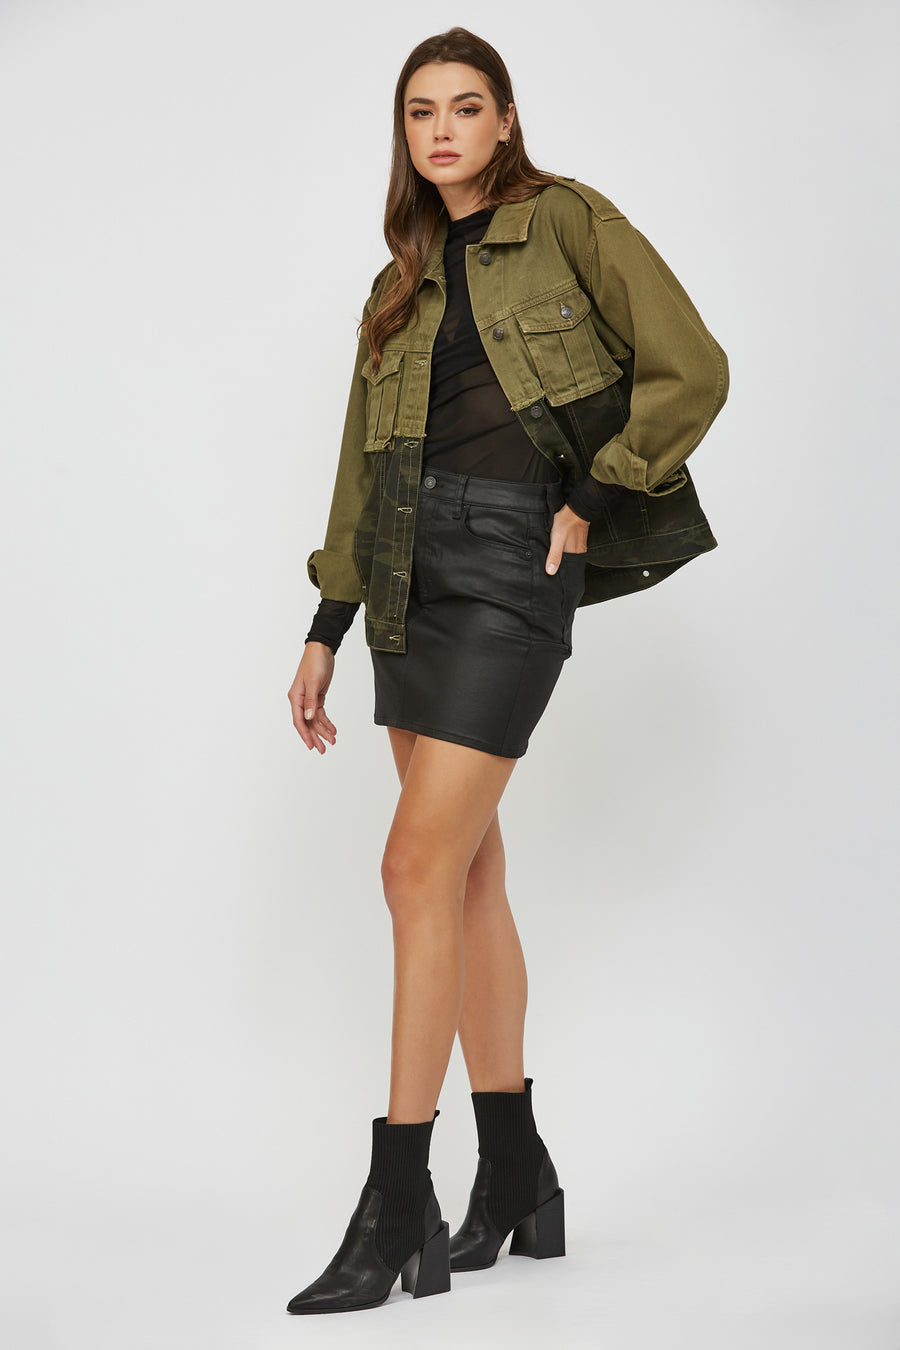 [REBEL] OLIVE DOUBLE DENIM CLASSIC FITTED JACKET